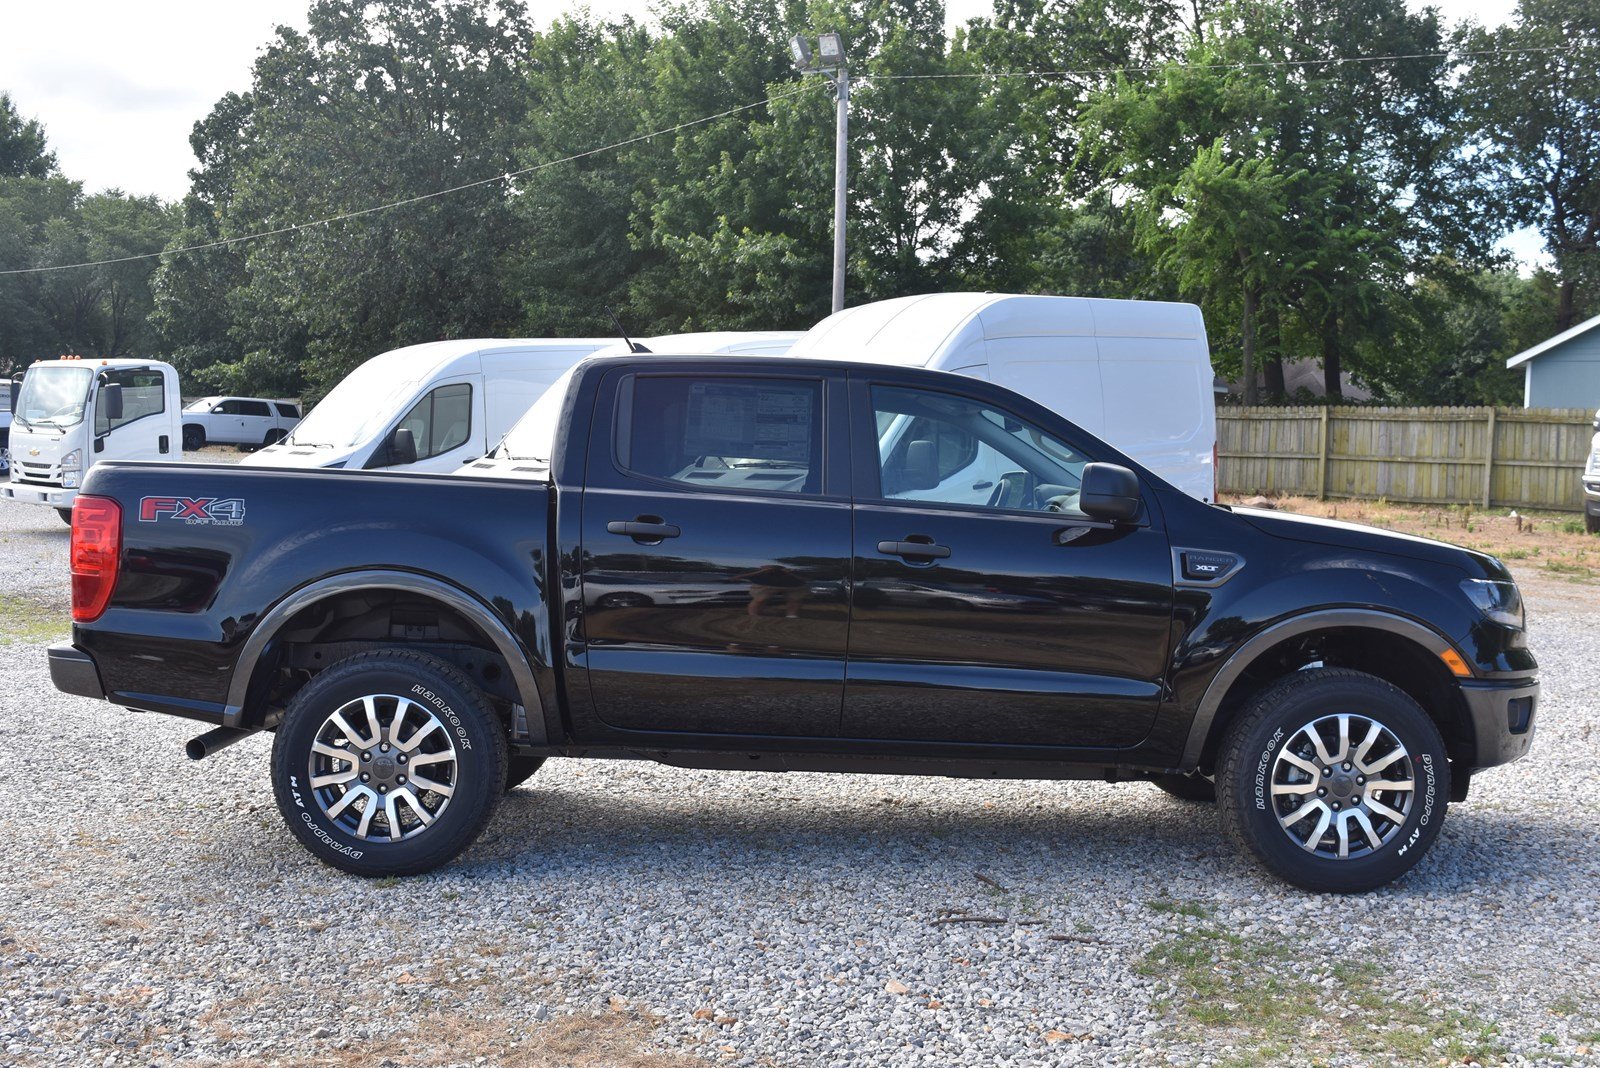 New 2019 Ford Ranger Xlt 4wd Crew Cab With Navigation 4wd